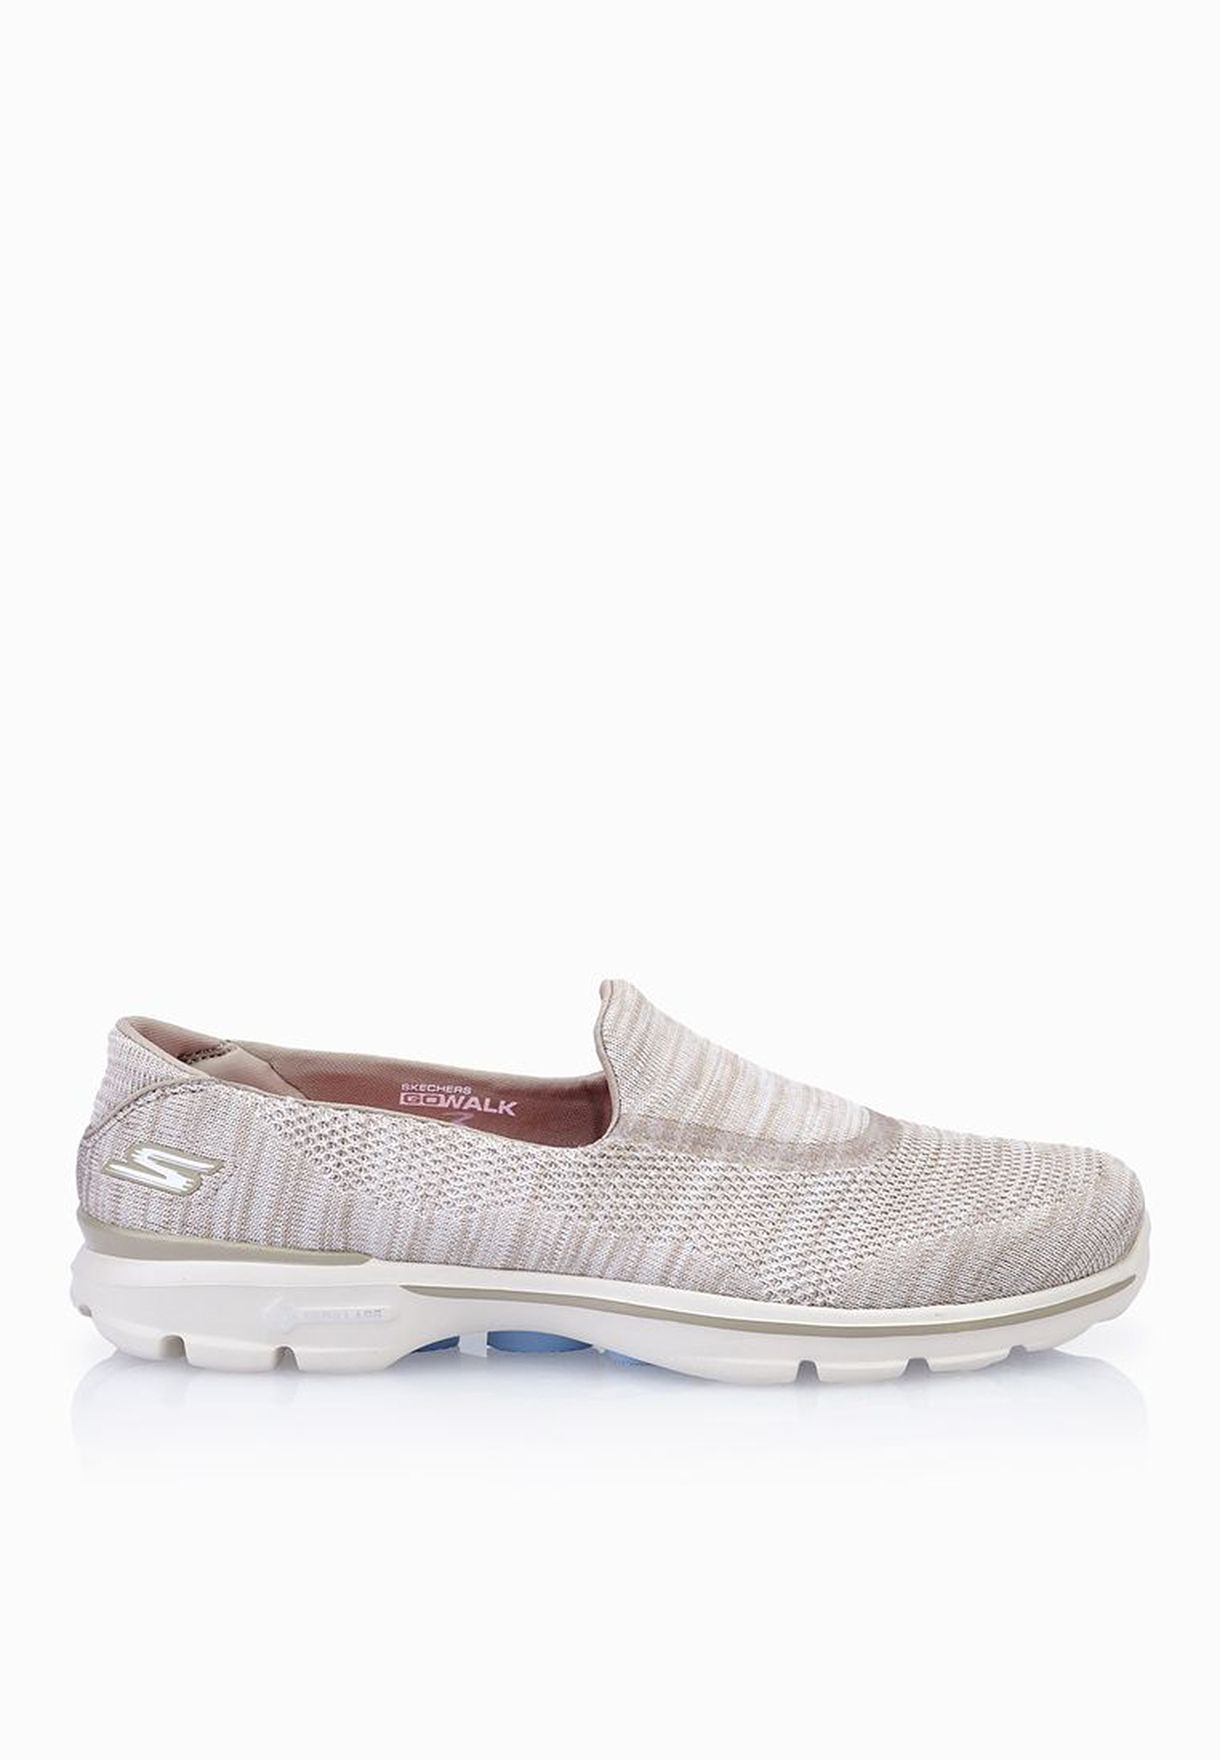 skechers go walk 3 fitknit extreme